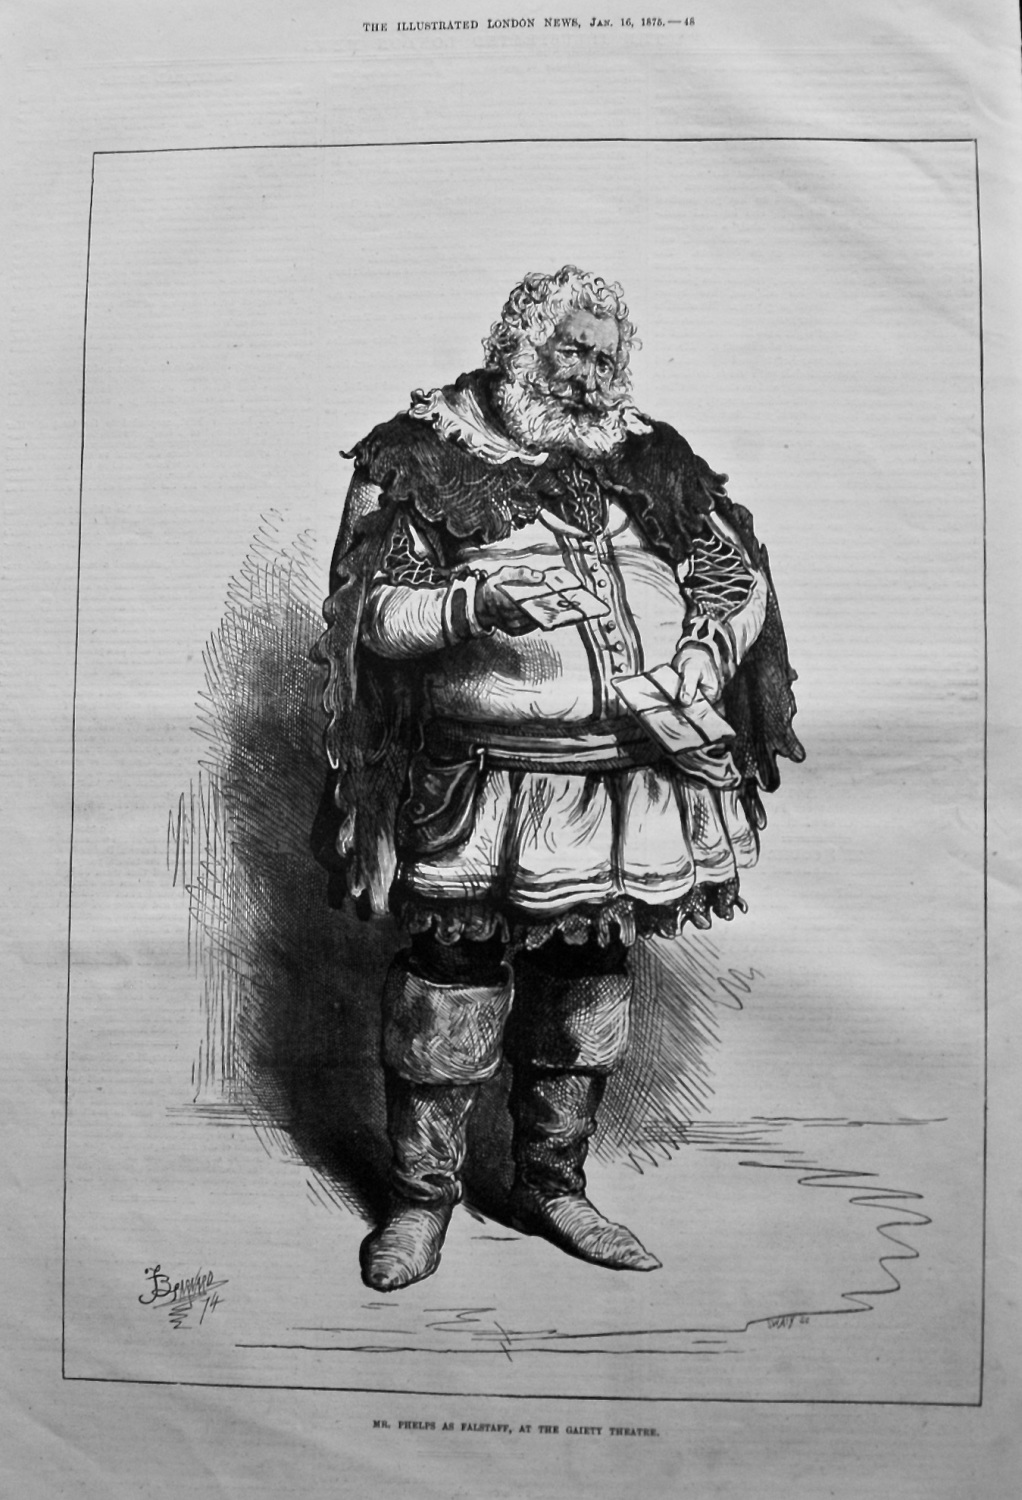 Mr. Phelps as Falstaff, at the Gaiety Theatre. 1875.